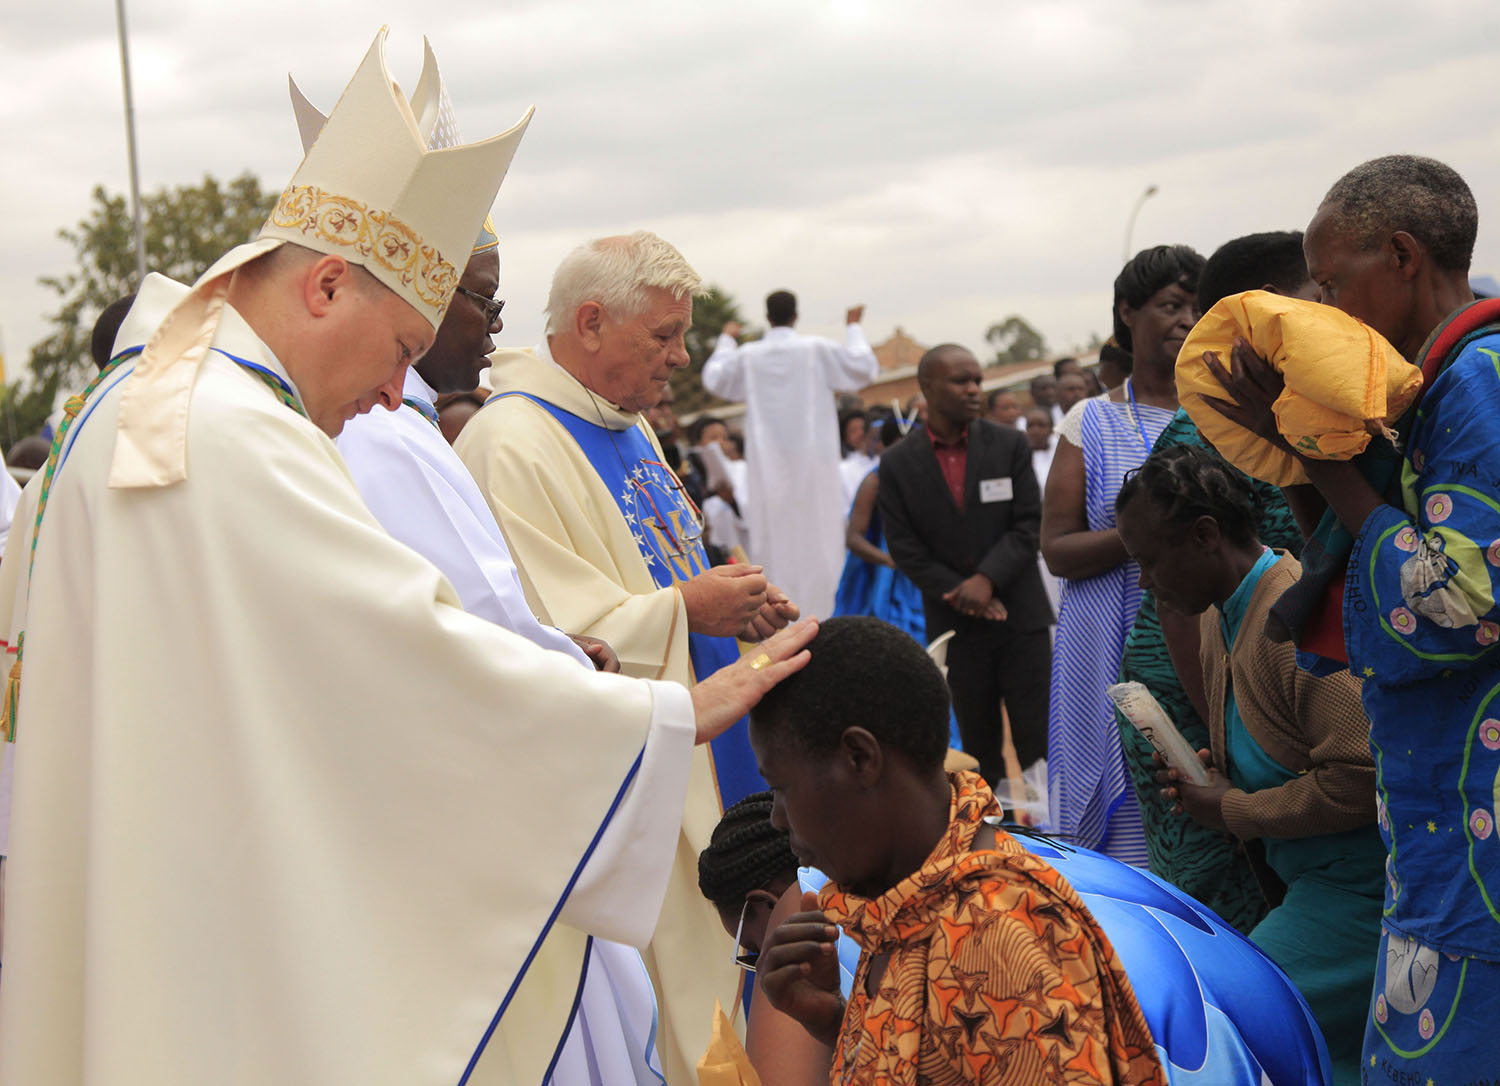 Clerics bless pilgrims after giving their offerings during a Mass to celebrate the Assumption Day at Kibeho last year. Sam Ngendahimana.